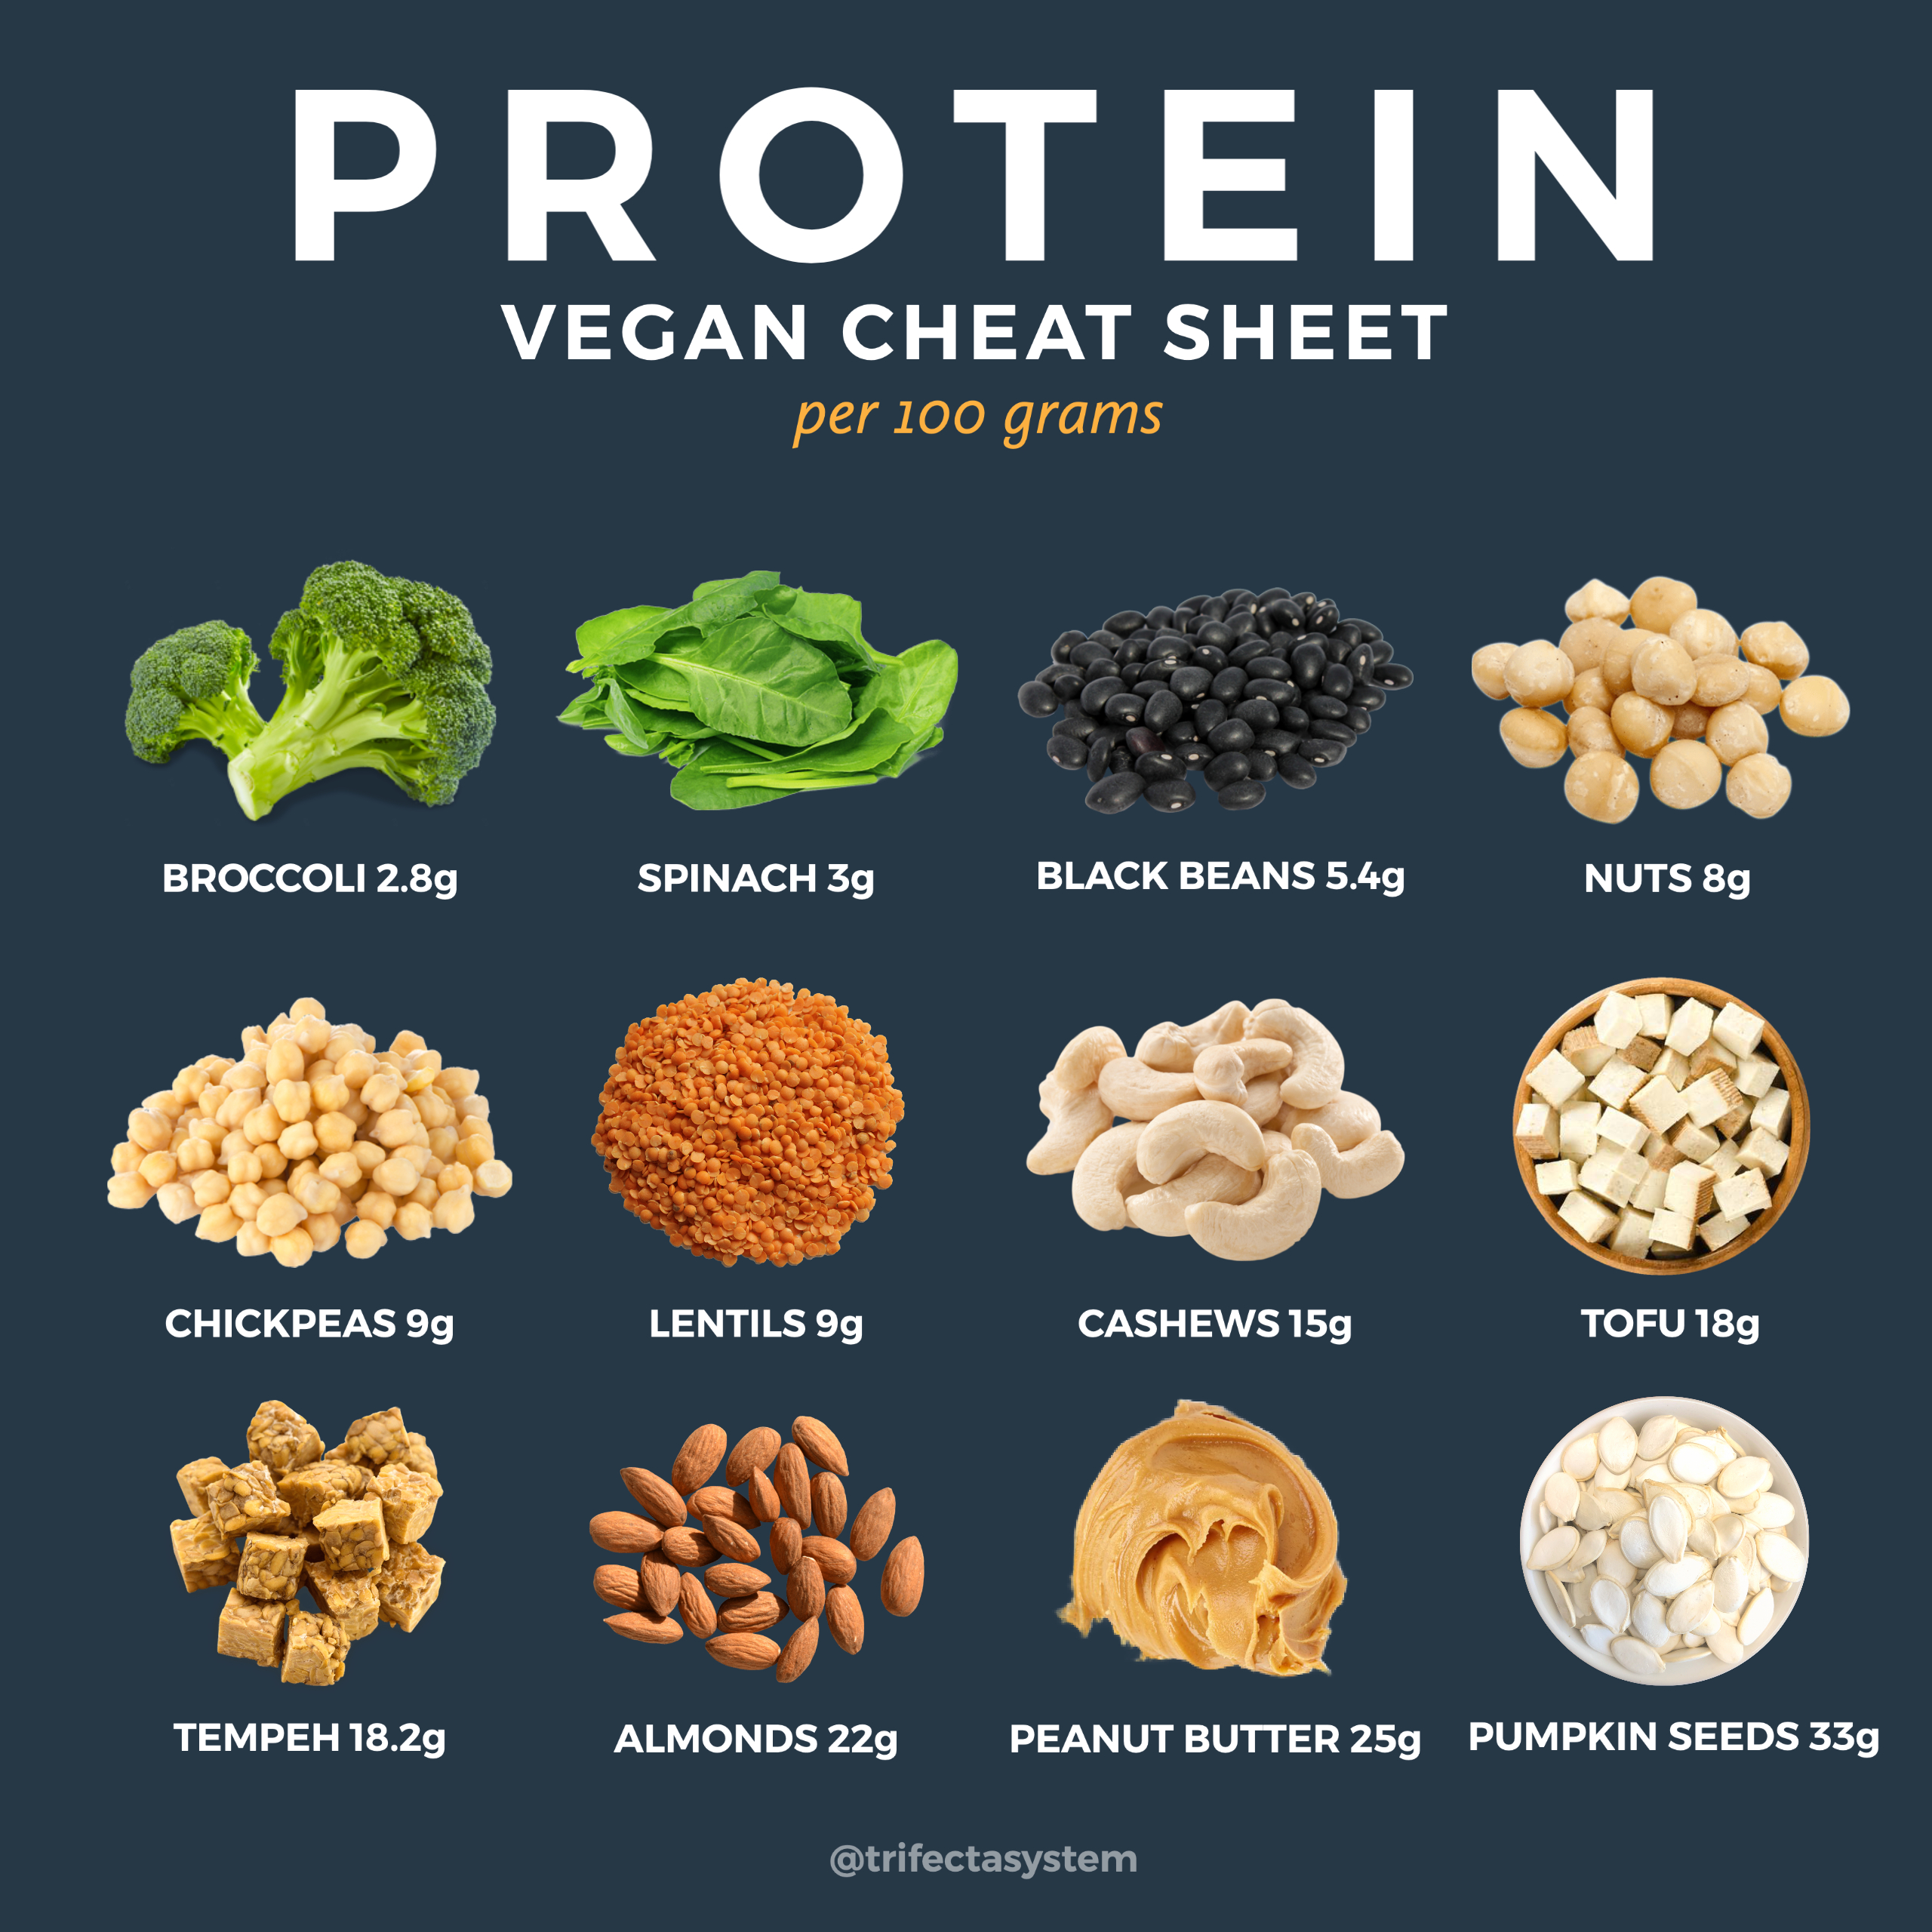 "The Ultimate Guide to Vegan Protein Sources: Fuel Your Plant-Based Lifestyle with These Nutrient-Packed Options"